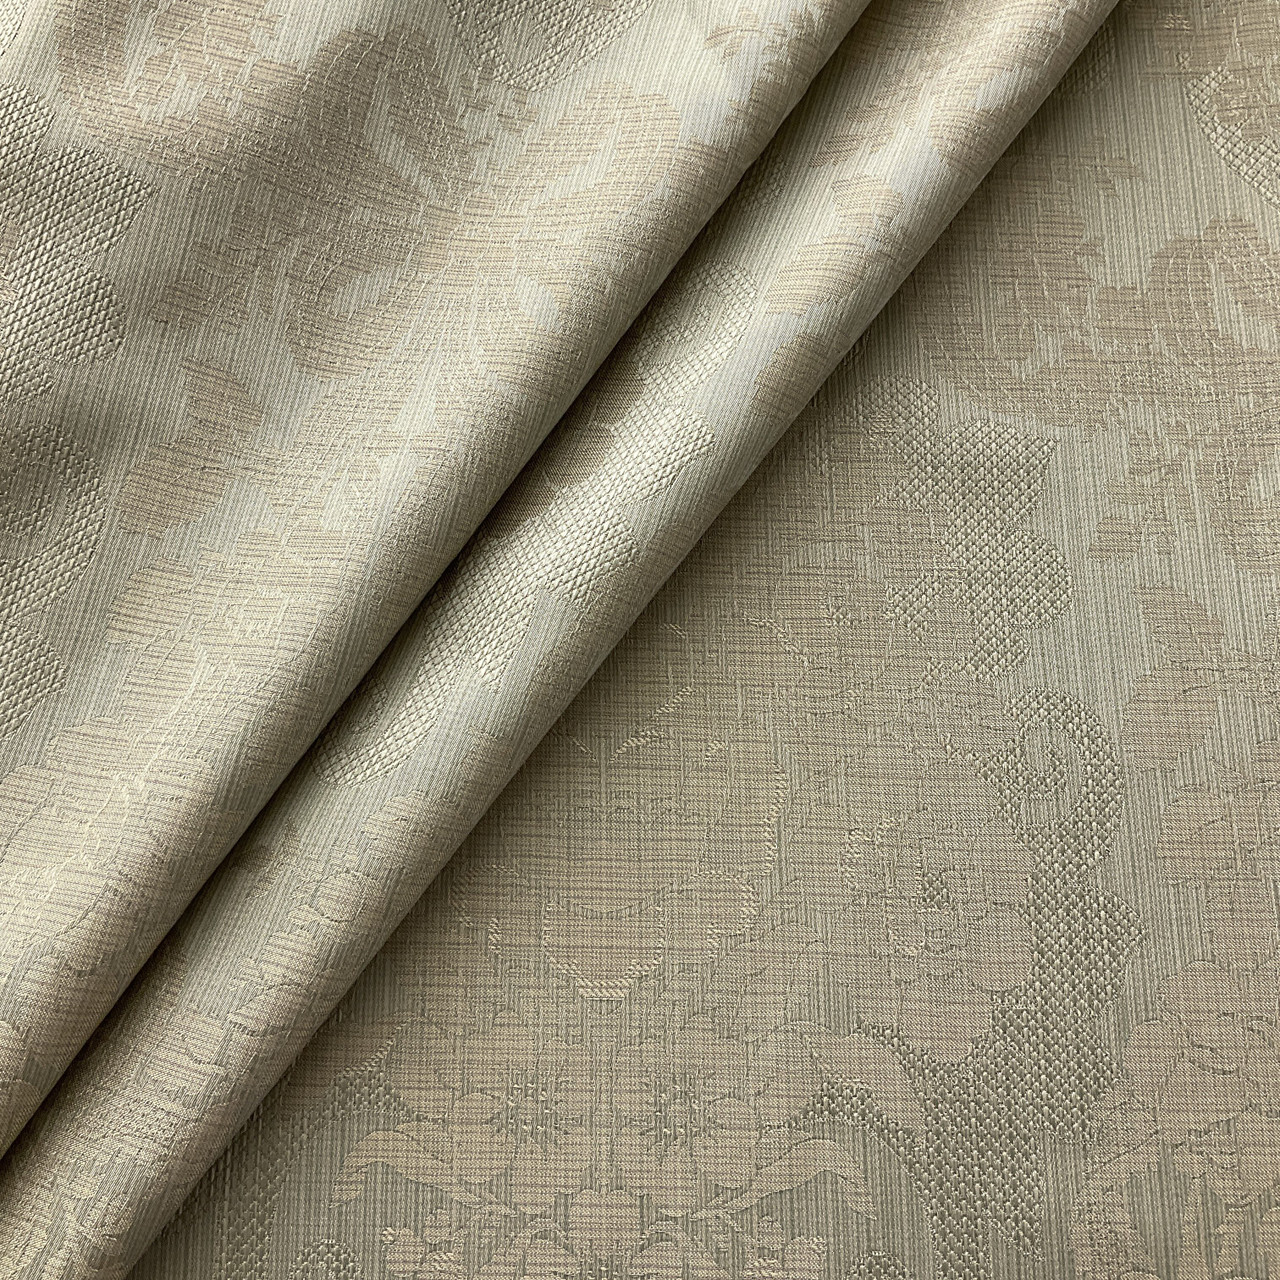 Traditional Damask in Sage Green | Upholstery / Drapery Fabric | 54 Wide |  By the Yard